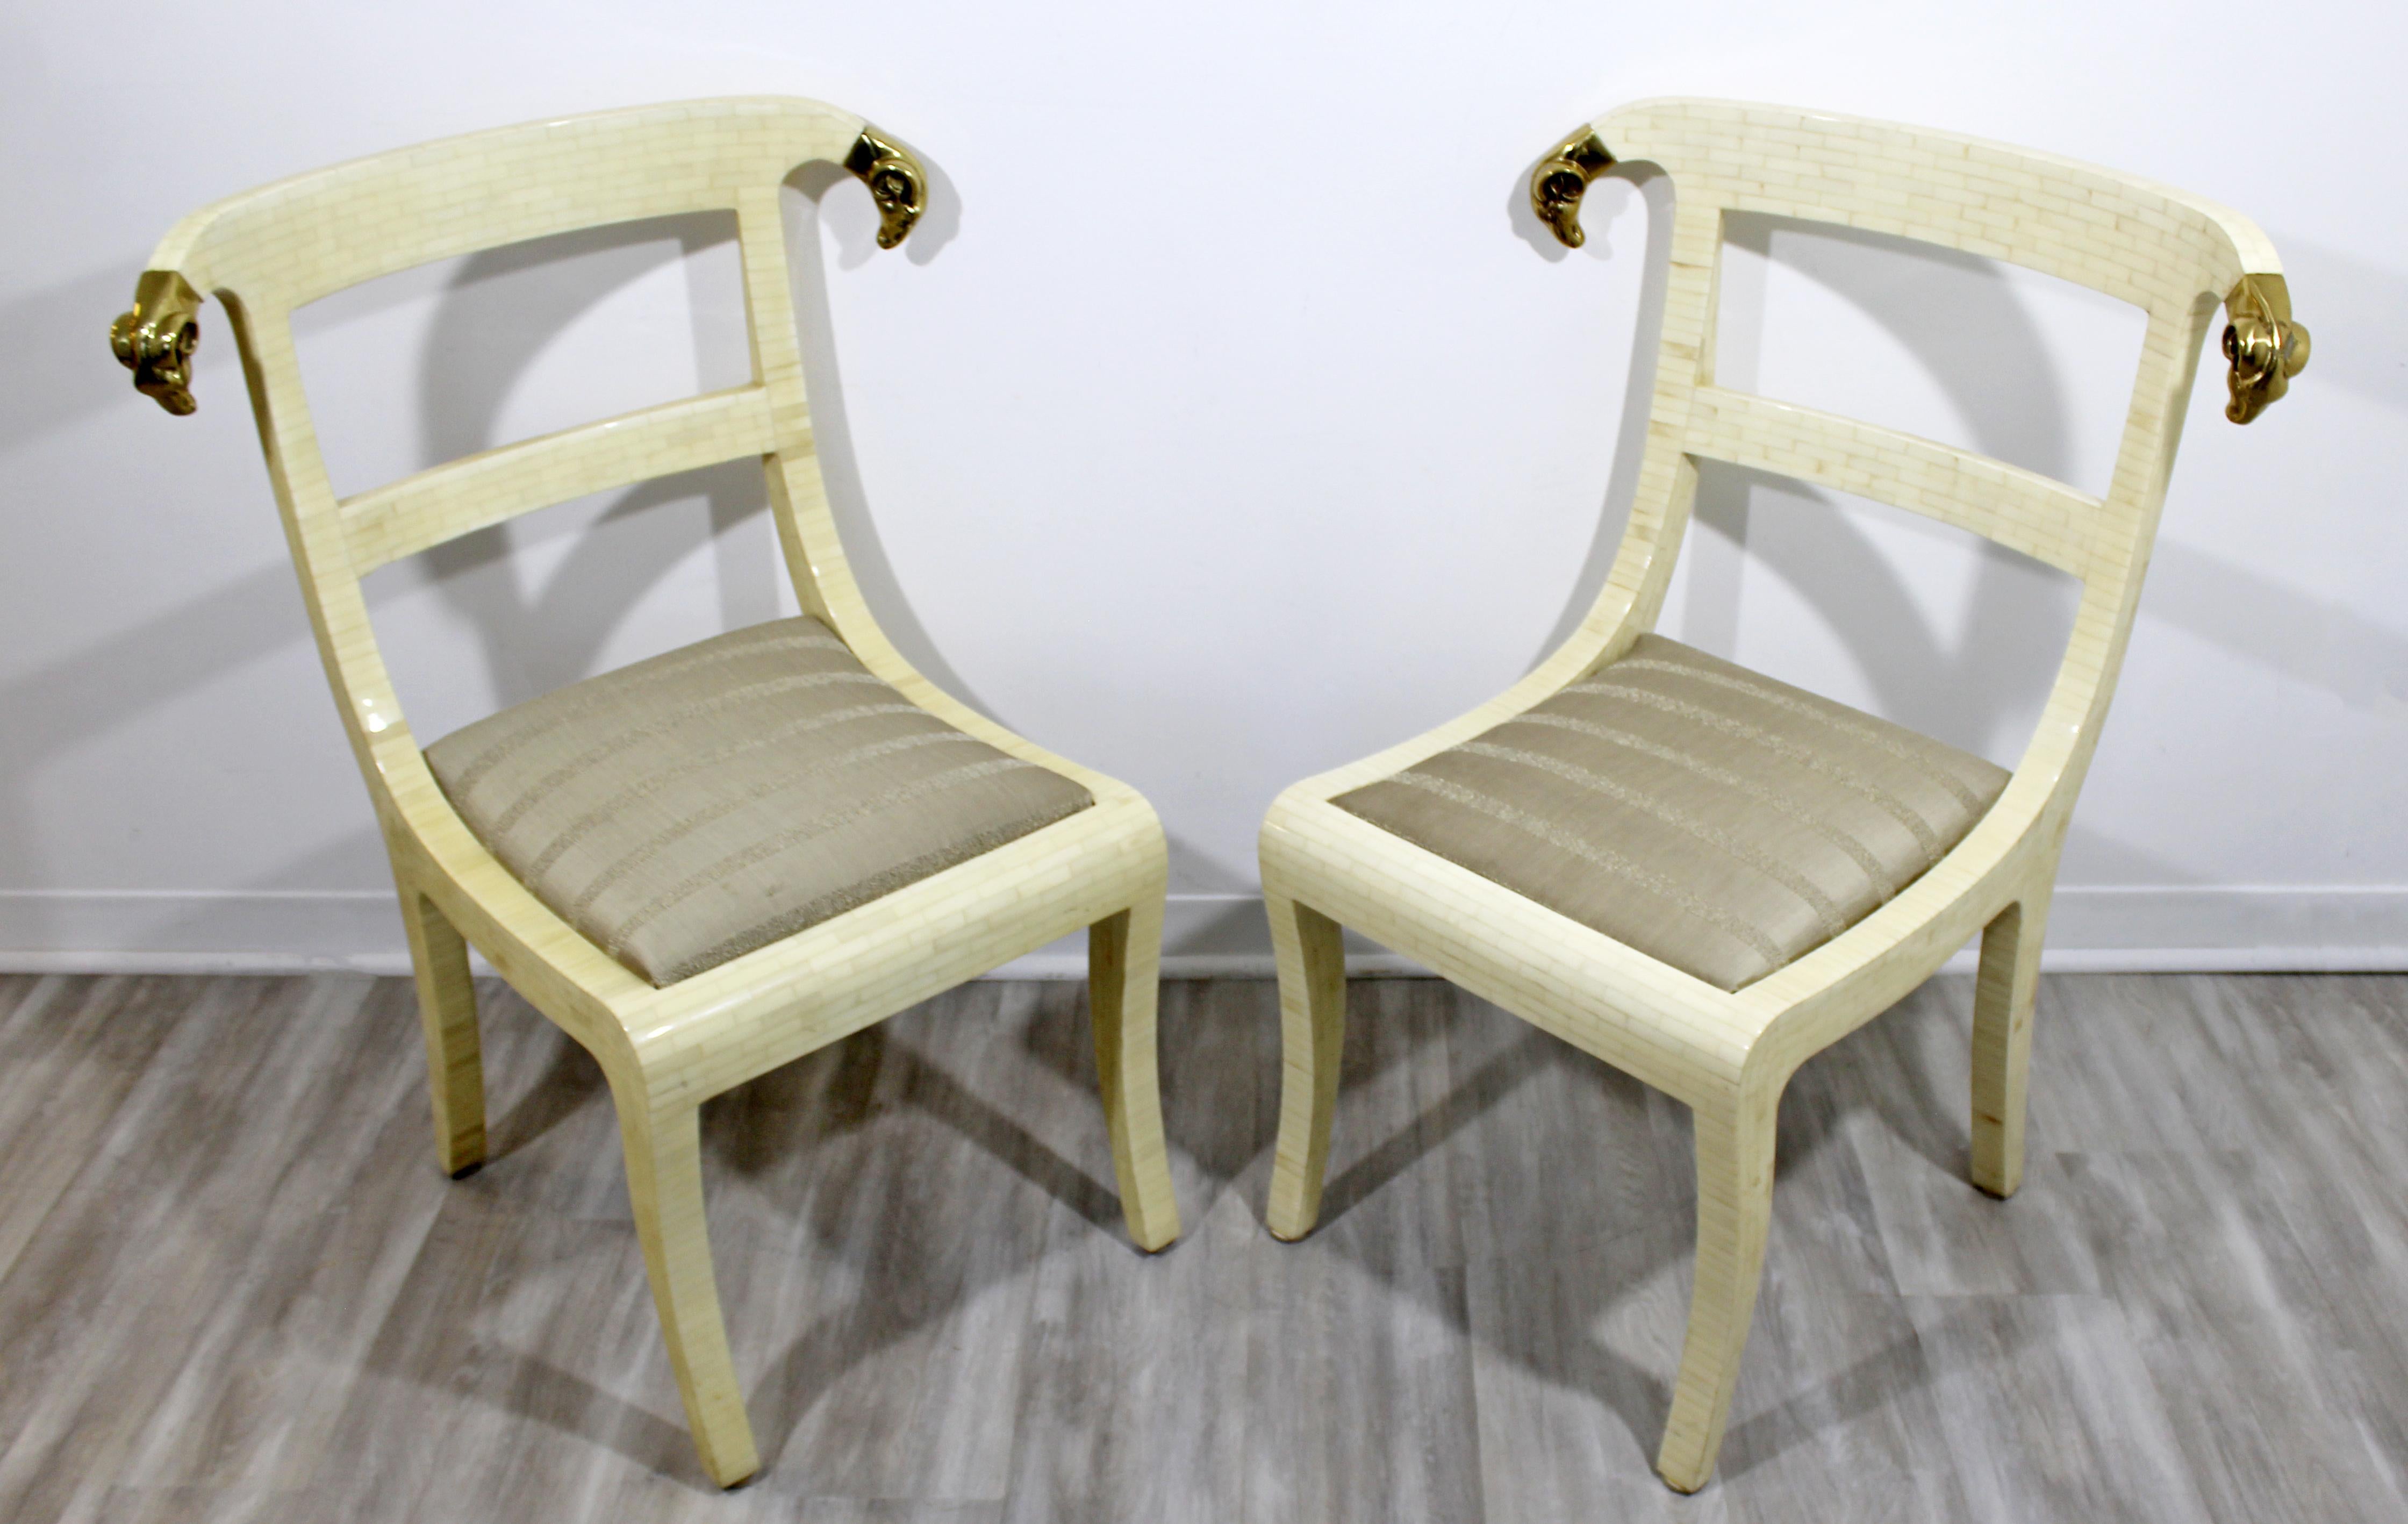 For your consideration is a sensational pair of lounge accent chairs, made of tessellated stone and with brass rams head accents, for Jimeco, made in Colombia, circa the 1970s. In excellent vintage condition. The dimensions of each are 18.5